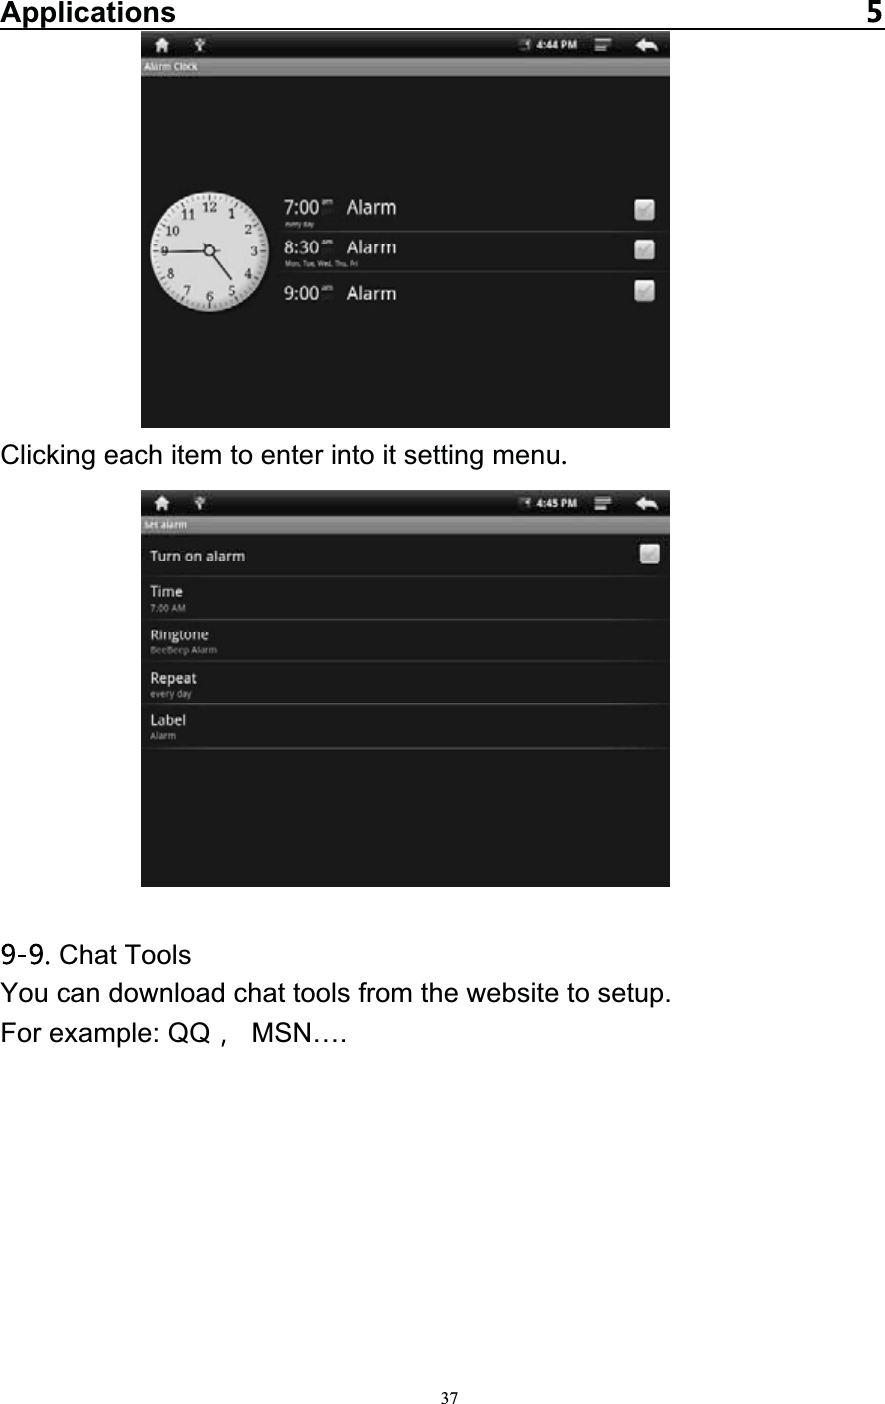   37Applications Clicking each item to enter into it setting menuChat ToolsYou can download chat tools from the website to setup.   For example: QQ  MSN…. 